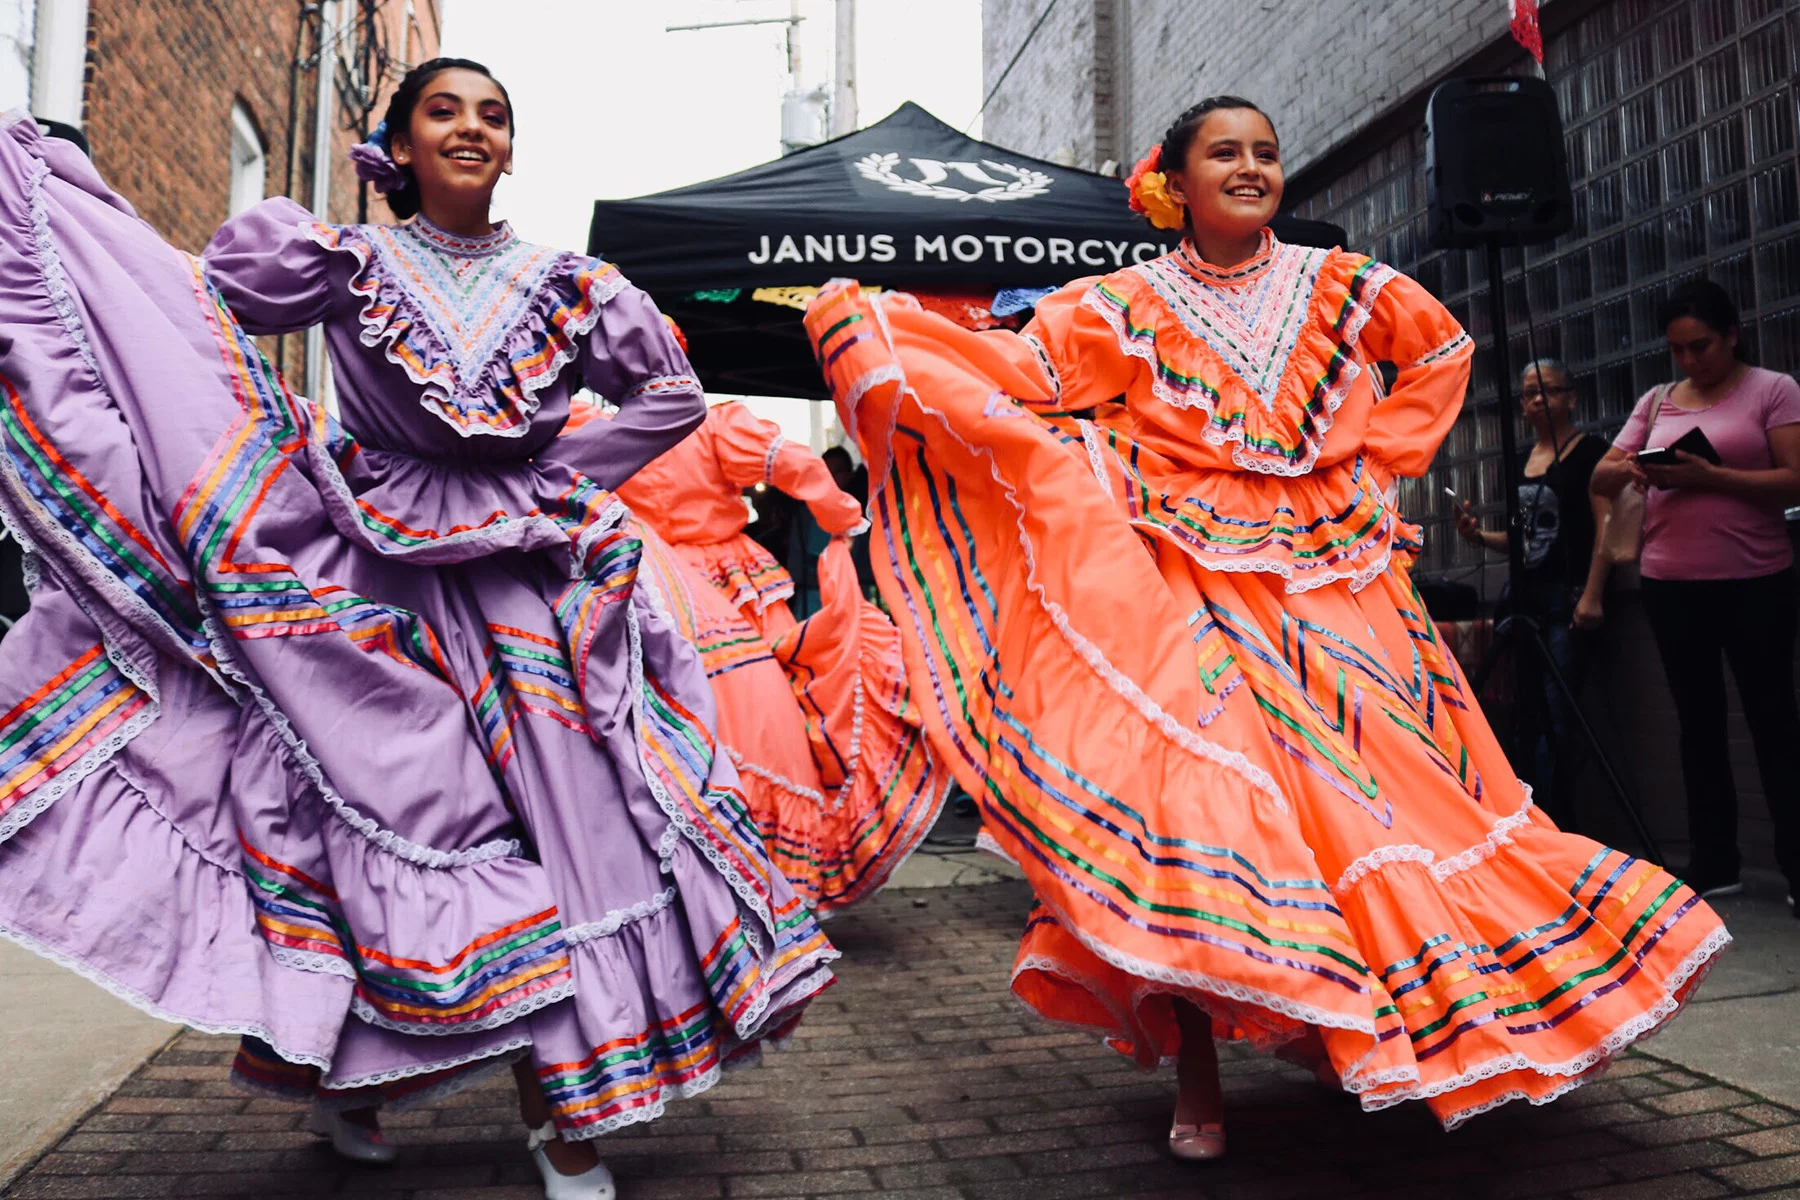 Dancers in Mexico